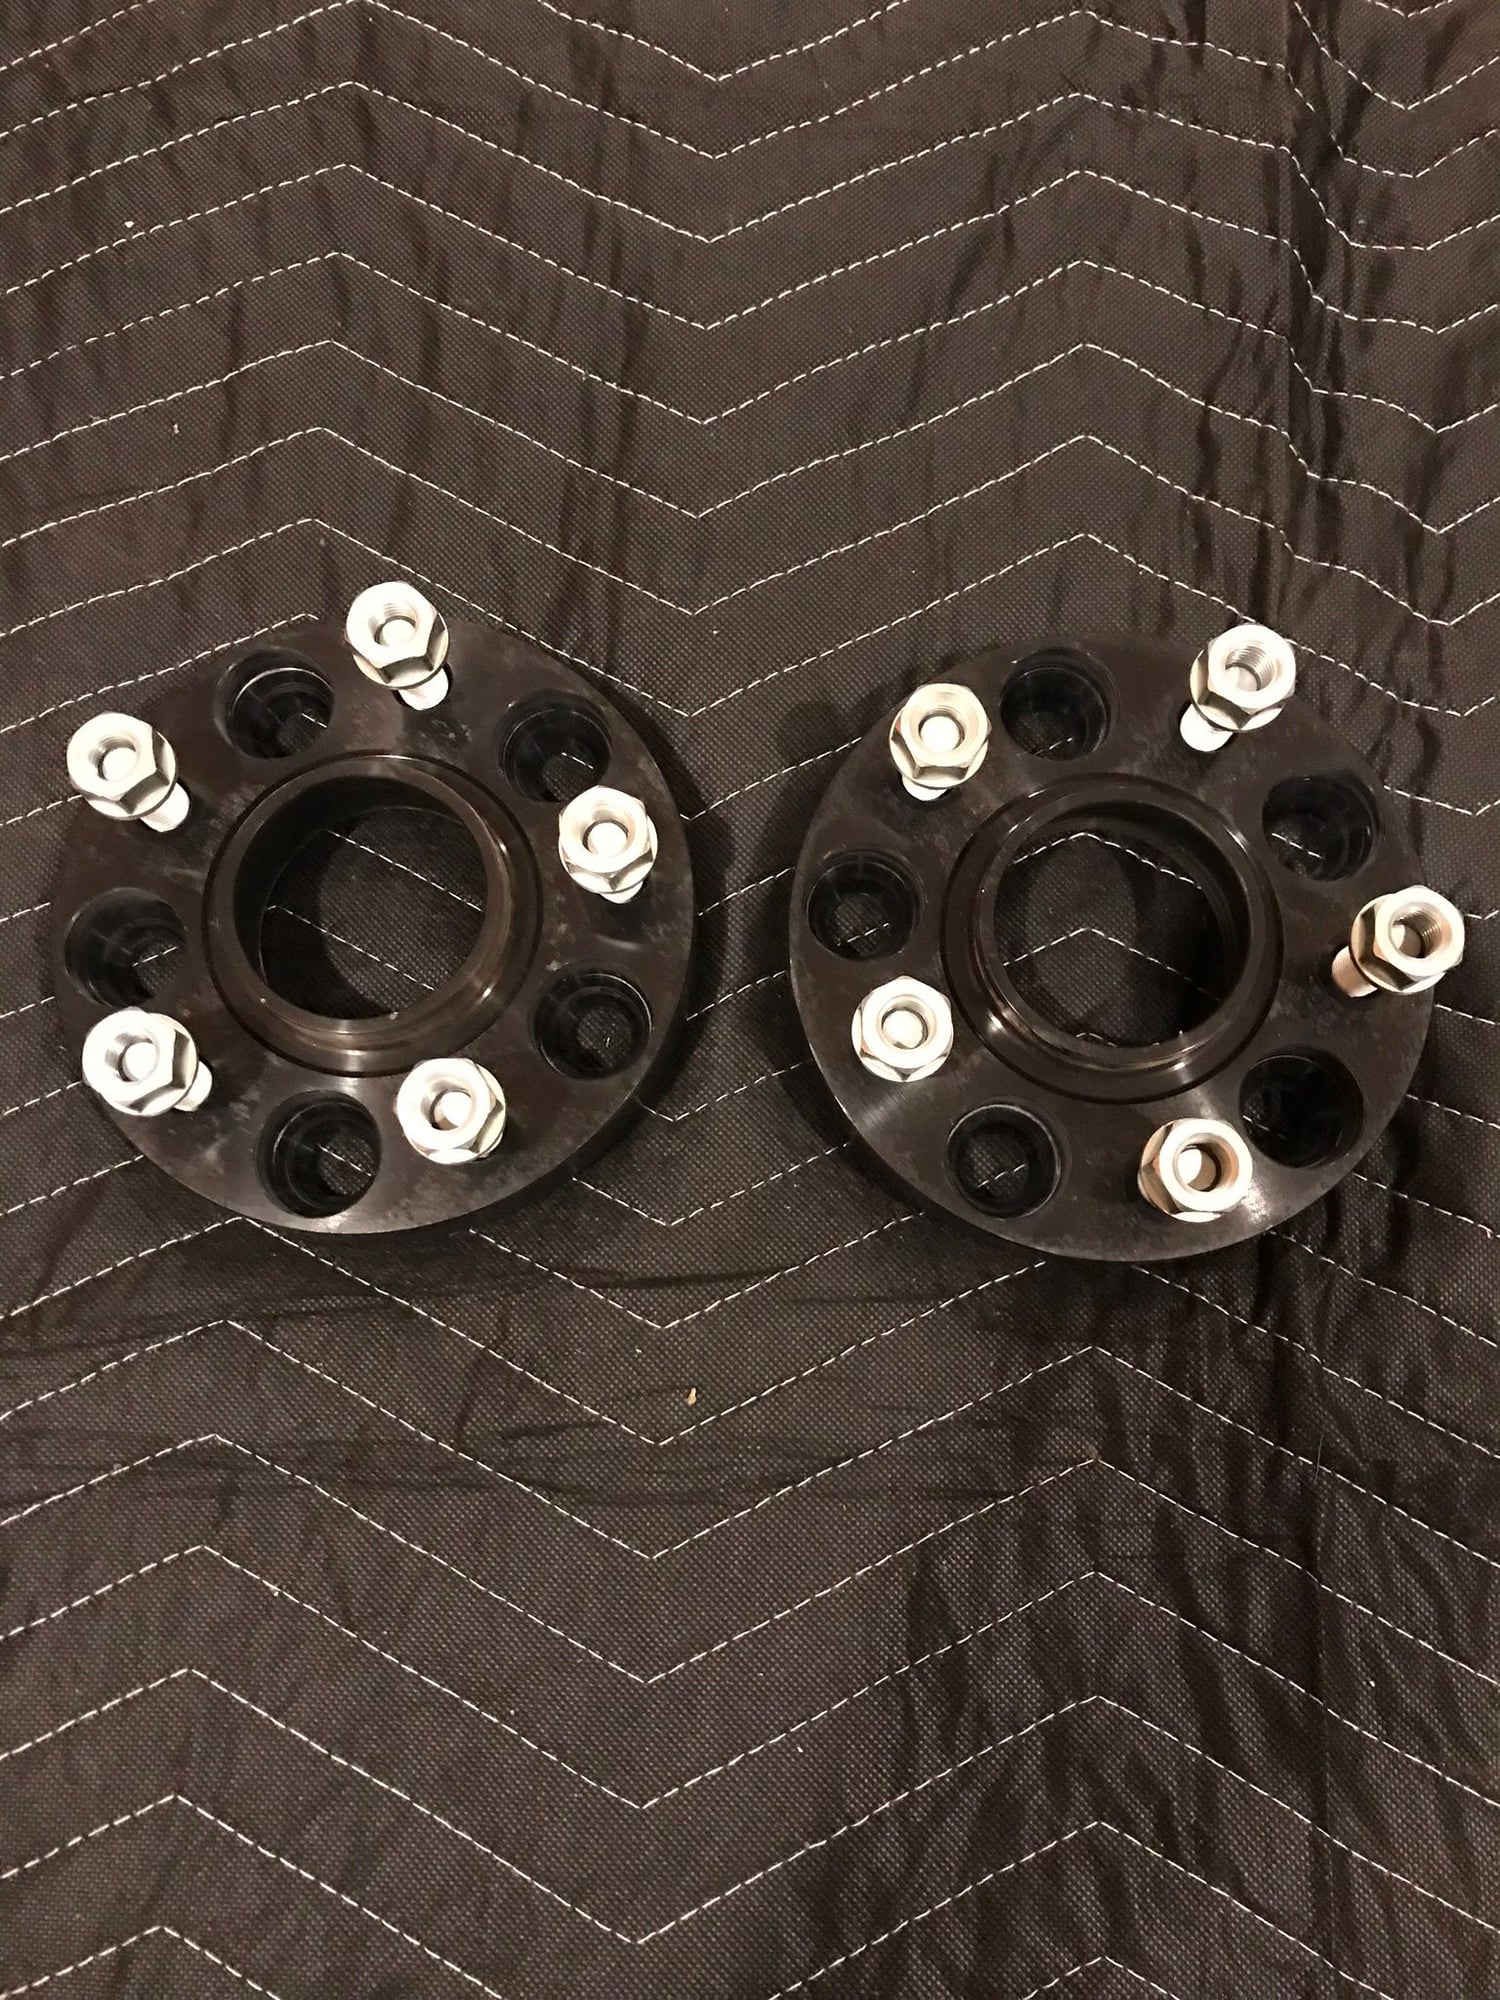 2008 Acura TL - H&R 25mm wheel spacers - Wheels and Tires/Axles - $85 - Rockford, IL 61103, United States